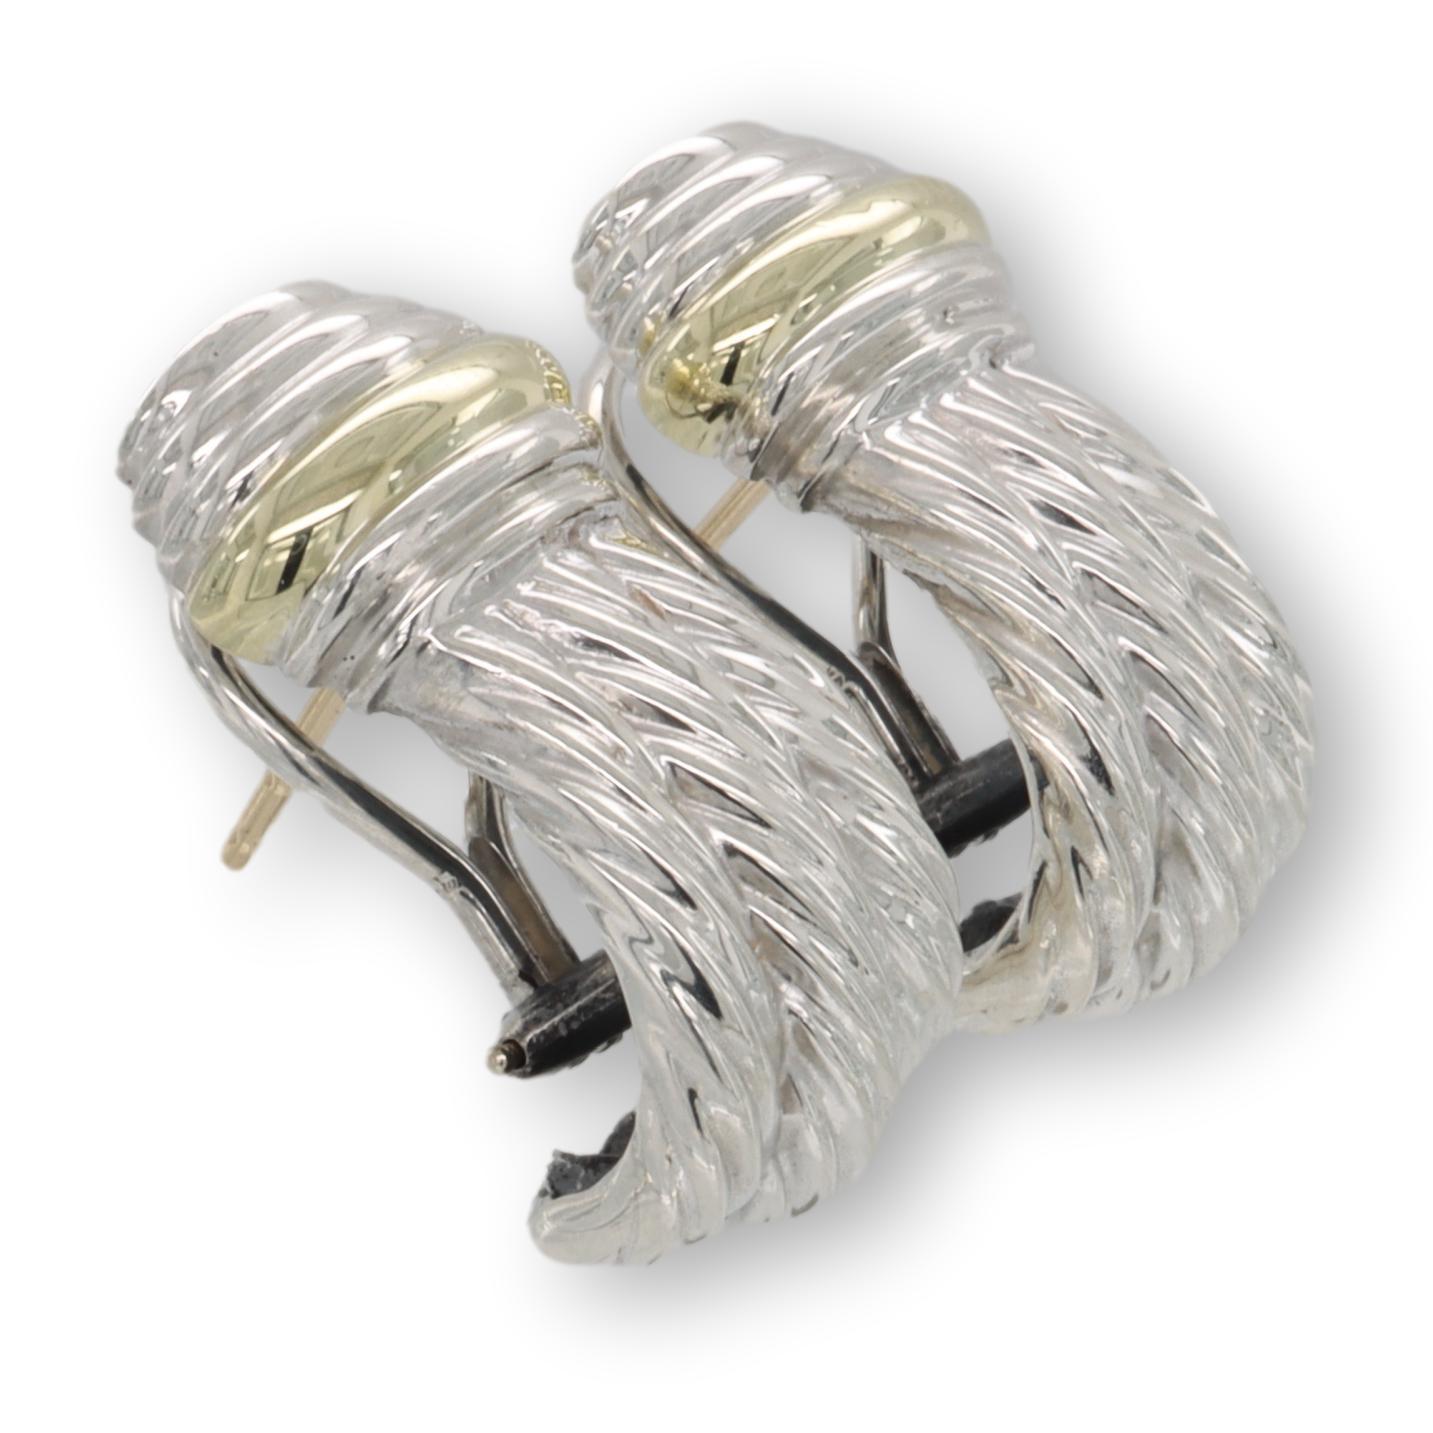 David Yurman two tone pair of earrings from the cable classics Renaissance collection finely crafted in blackened sterling silver with three rows of fluted cable strips and one yellow detail strip made in 14 karat yellow gold.The earrings have large